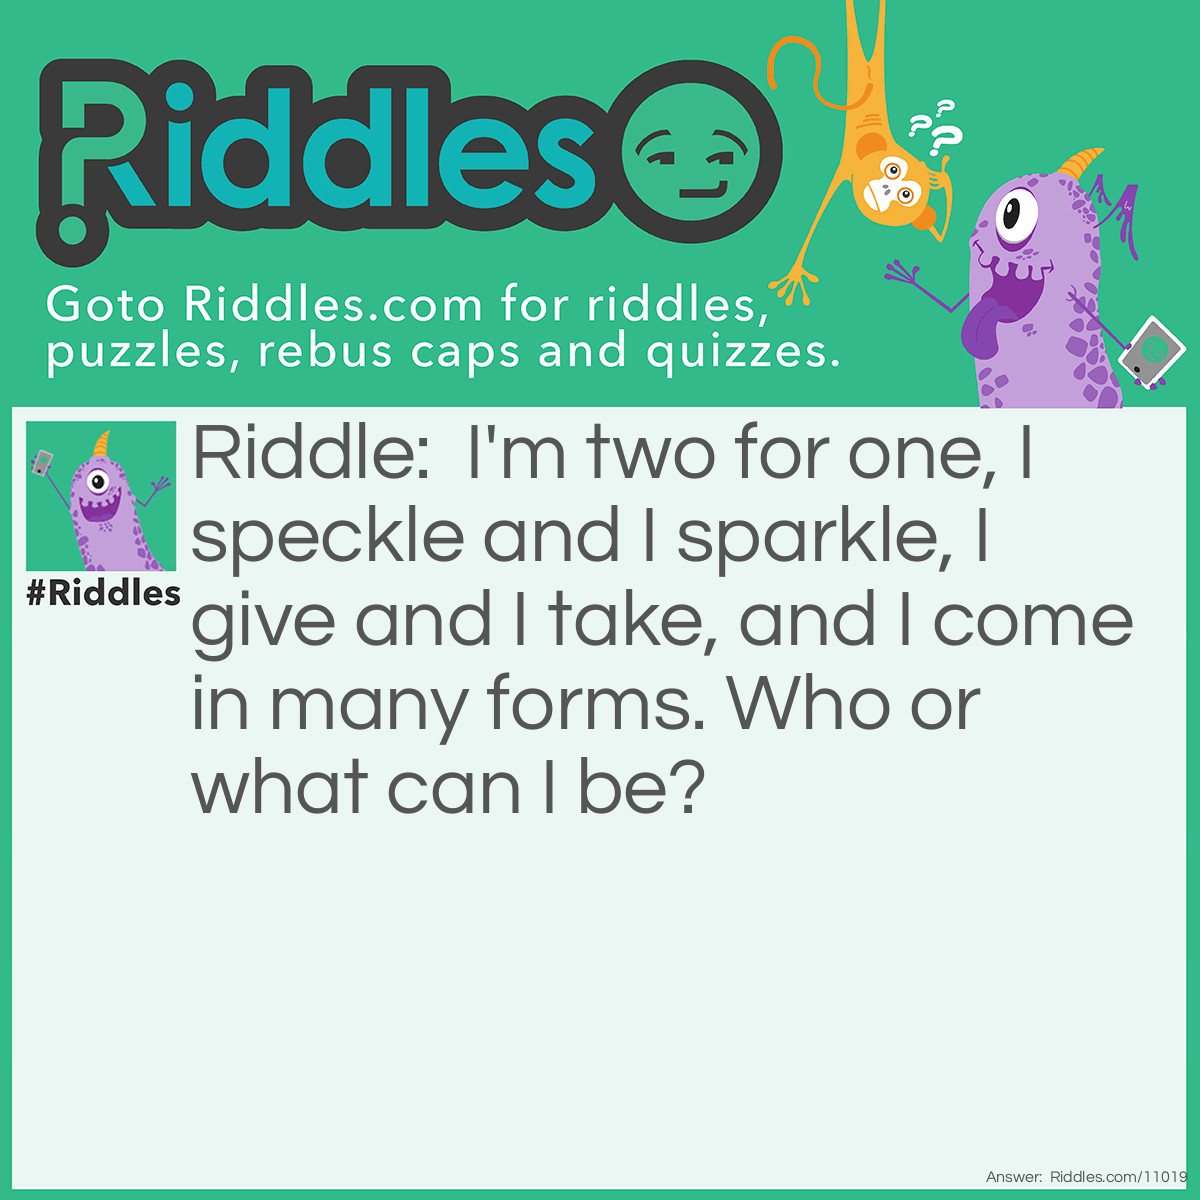 Riddle: I'm two for one, I speckle and I sparkle, I give and I take, and I come in many forms. Who or what can I be? Answer: Unanswered